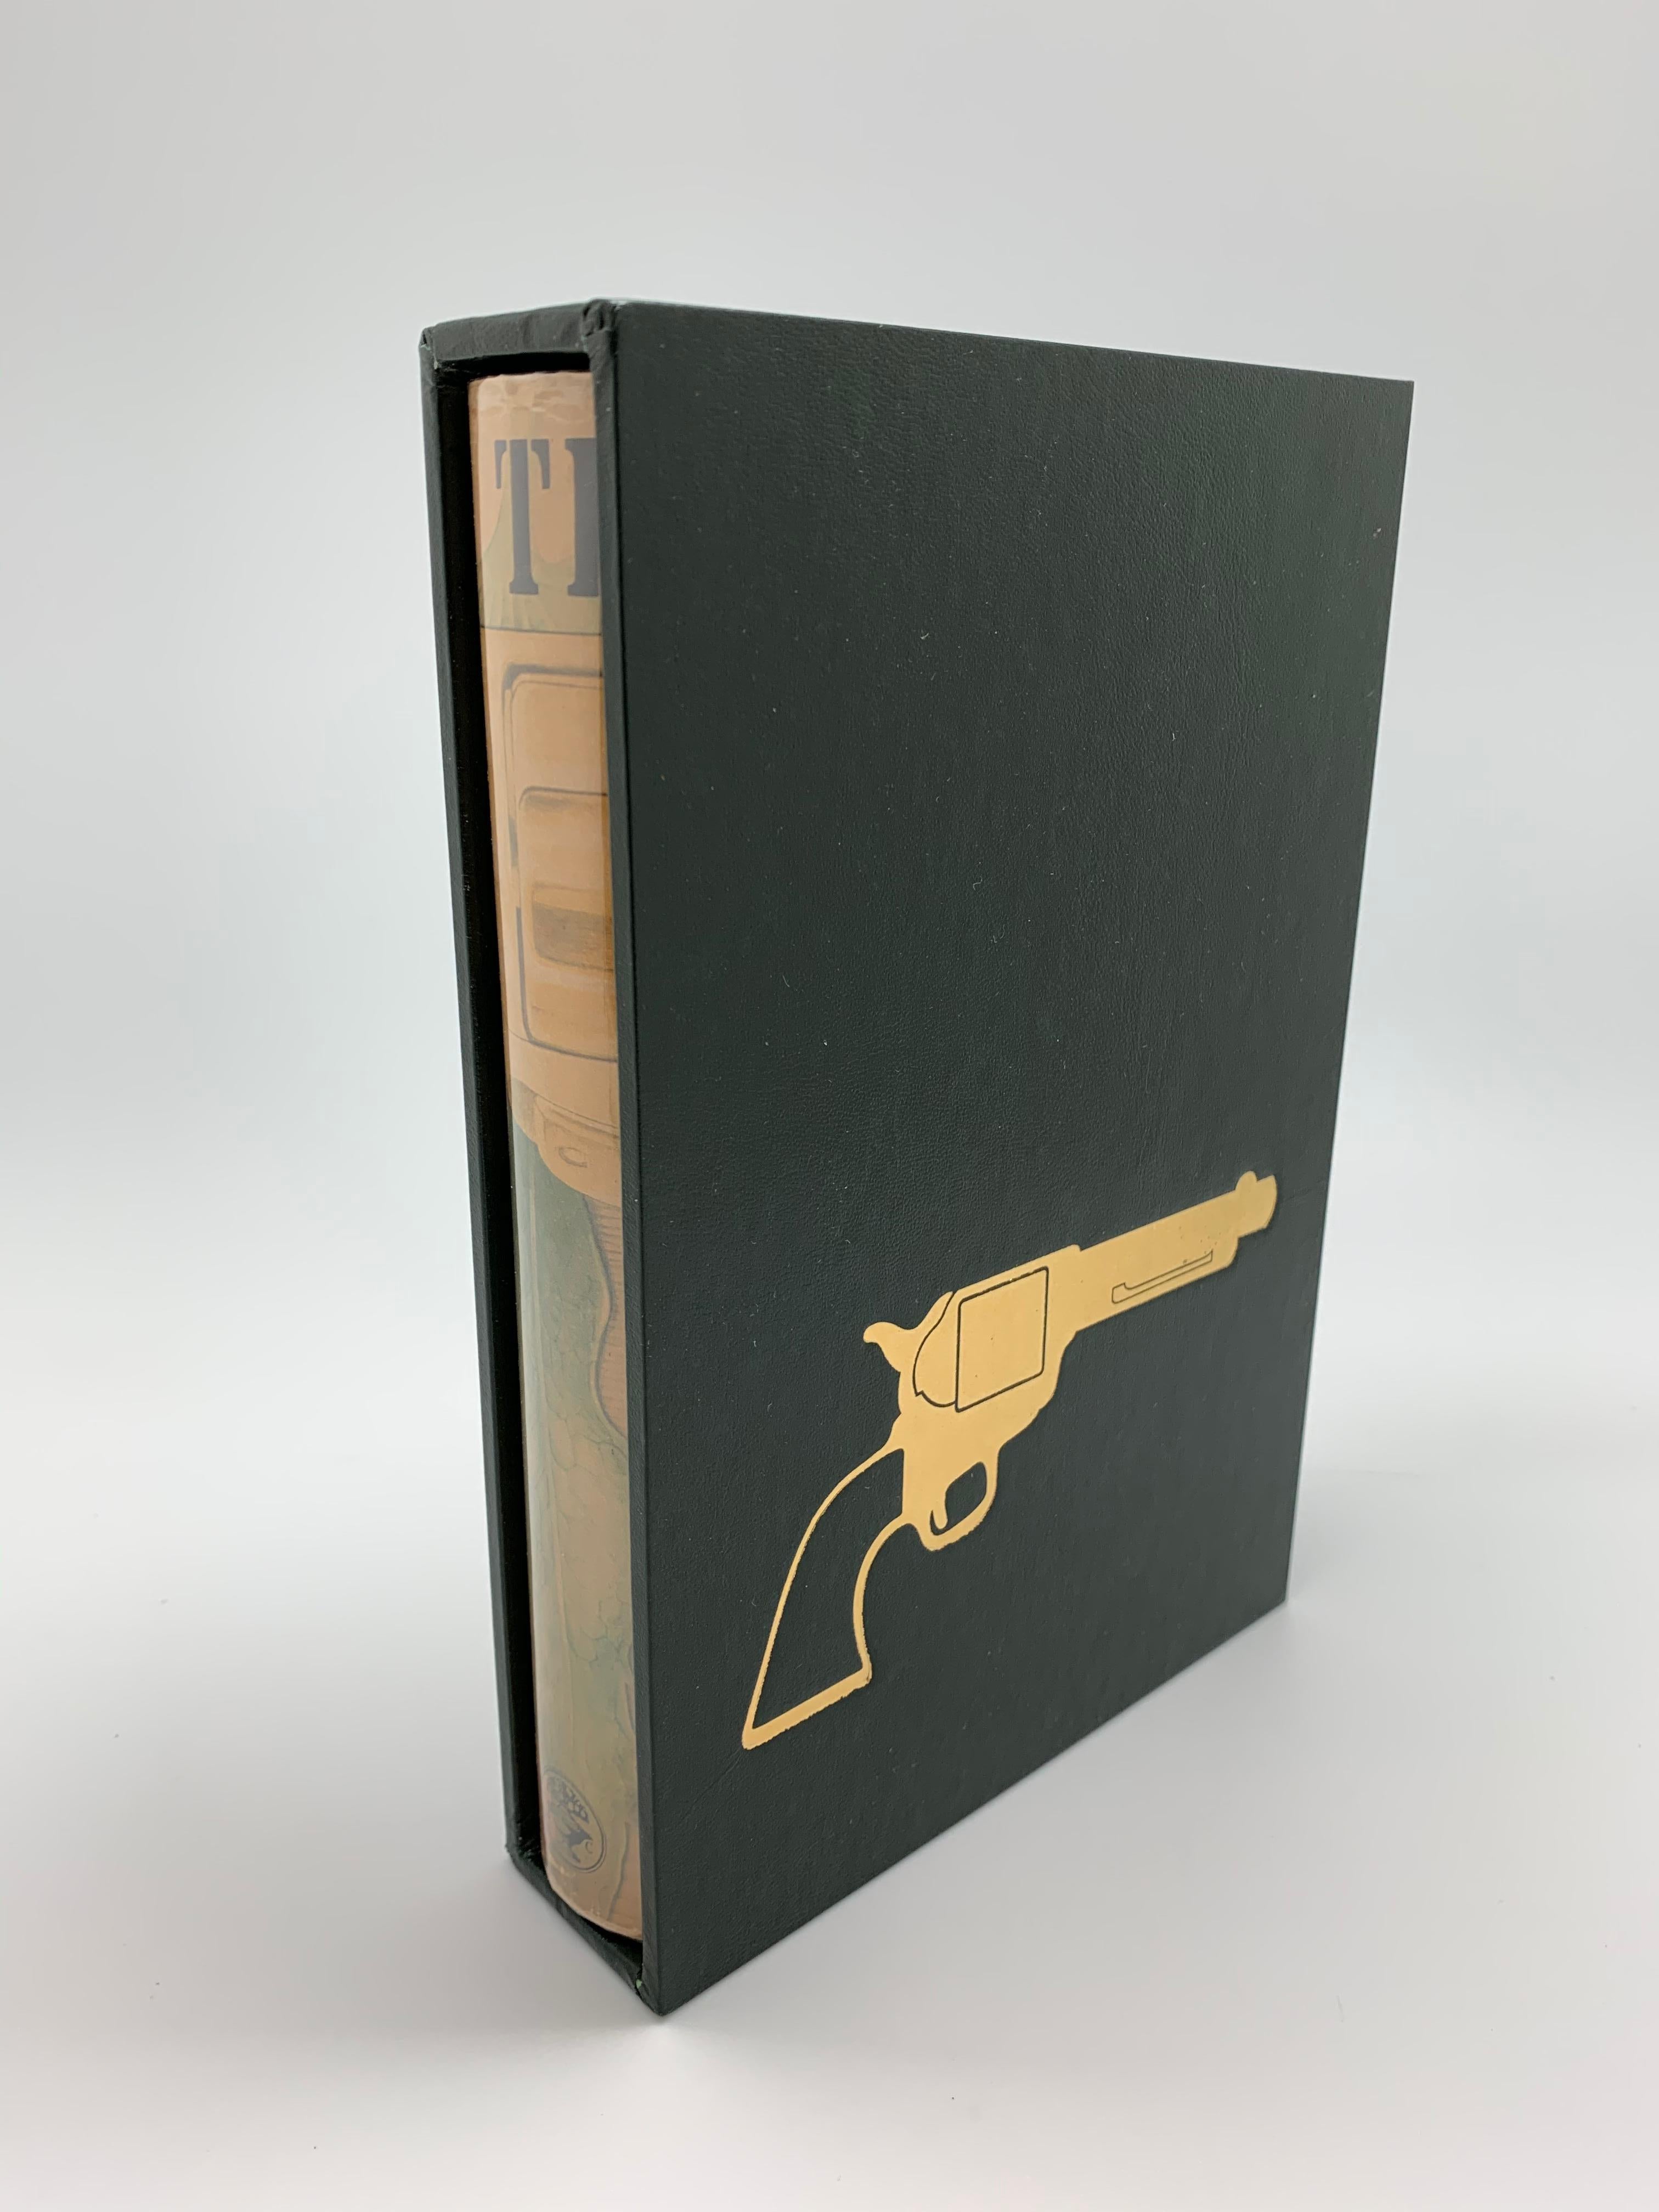 Fleming, Ian. The Man with the Golden Gun. London: Jonathan Cape, 1965. First edition, second state. Octavo, in original dust jacket with custom gilt embossed slipcase.

This is the first edition of Fleming’s final Bond novel, The Man with the